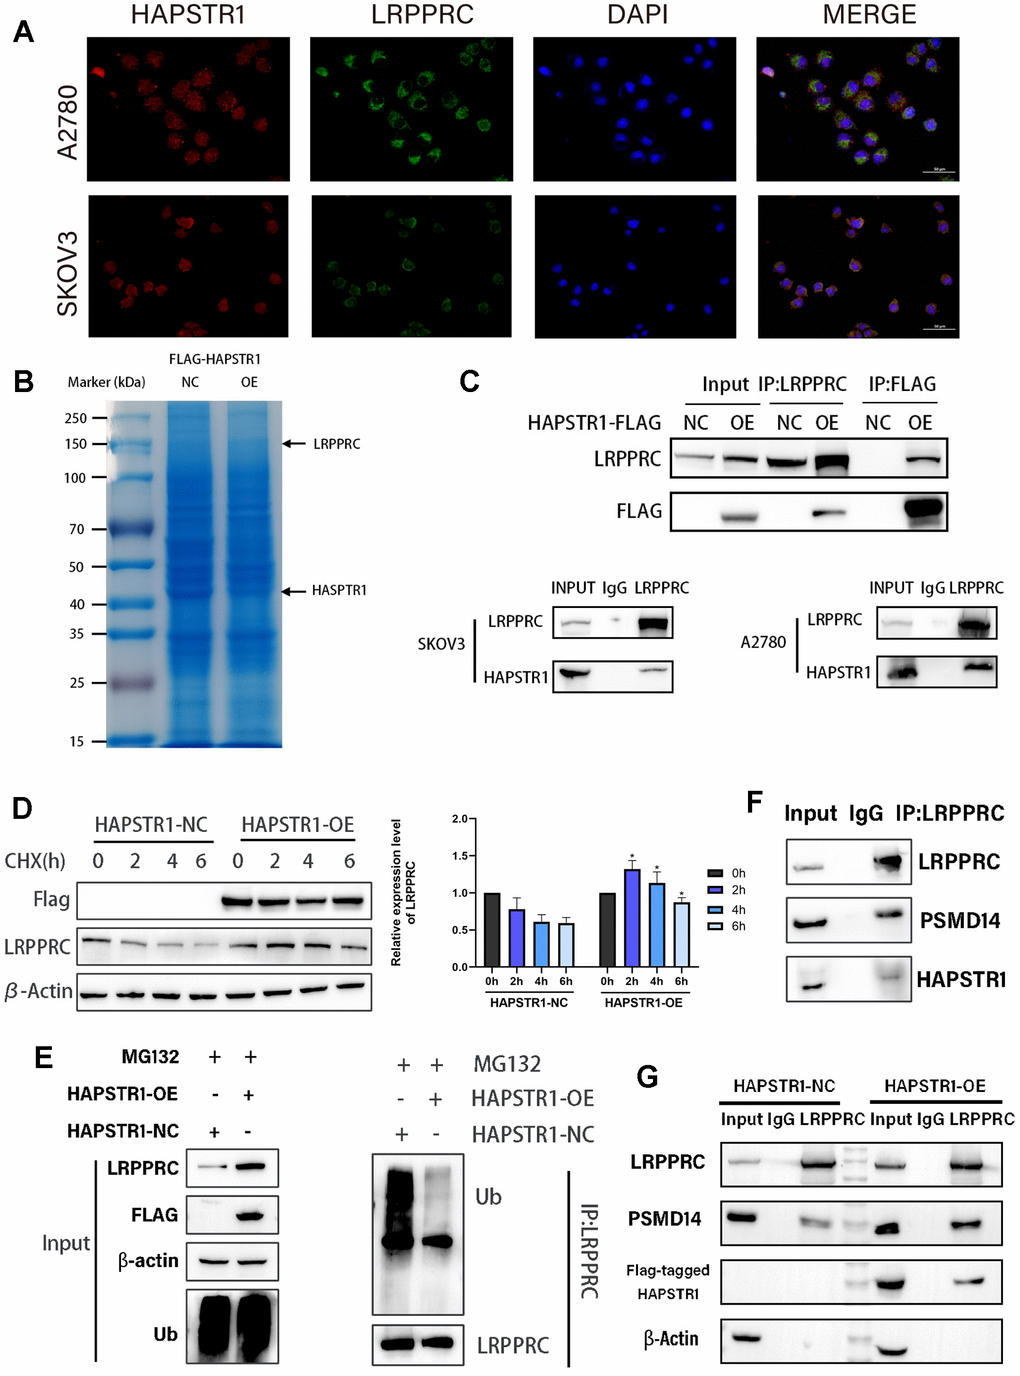 HAPSTR1 inhibits ubiquitination of LRPPRC and recruits PSMD14 to interact with LRPPRC. (A) Immunofluorescence staining was used to determine the common cellular localization of HAPSTR1 and LRPPRC. Original magnification: 400x. (B) The gels in the co-immunoprecipitation (COIP) assay were stained with Coomassie Brilliant Blue. (C) A COIP assay was used to detect the interaction between HAPSTR1 and LRPPRC in SKOV3 and A2780 cells. (D) HAPSTR promoted protein stability of LRPPRC under cycloheximide treatment. (E) HAPSTR1 suppressed ubiquitination of LRPPRC. (F) COIP was carried out to detect interactions between LRPPRC and HAPSTR1 and PSMD14 simultaneously. (G) HAPSTR1 recruited more PSMD14 for binding to LRPPRC.